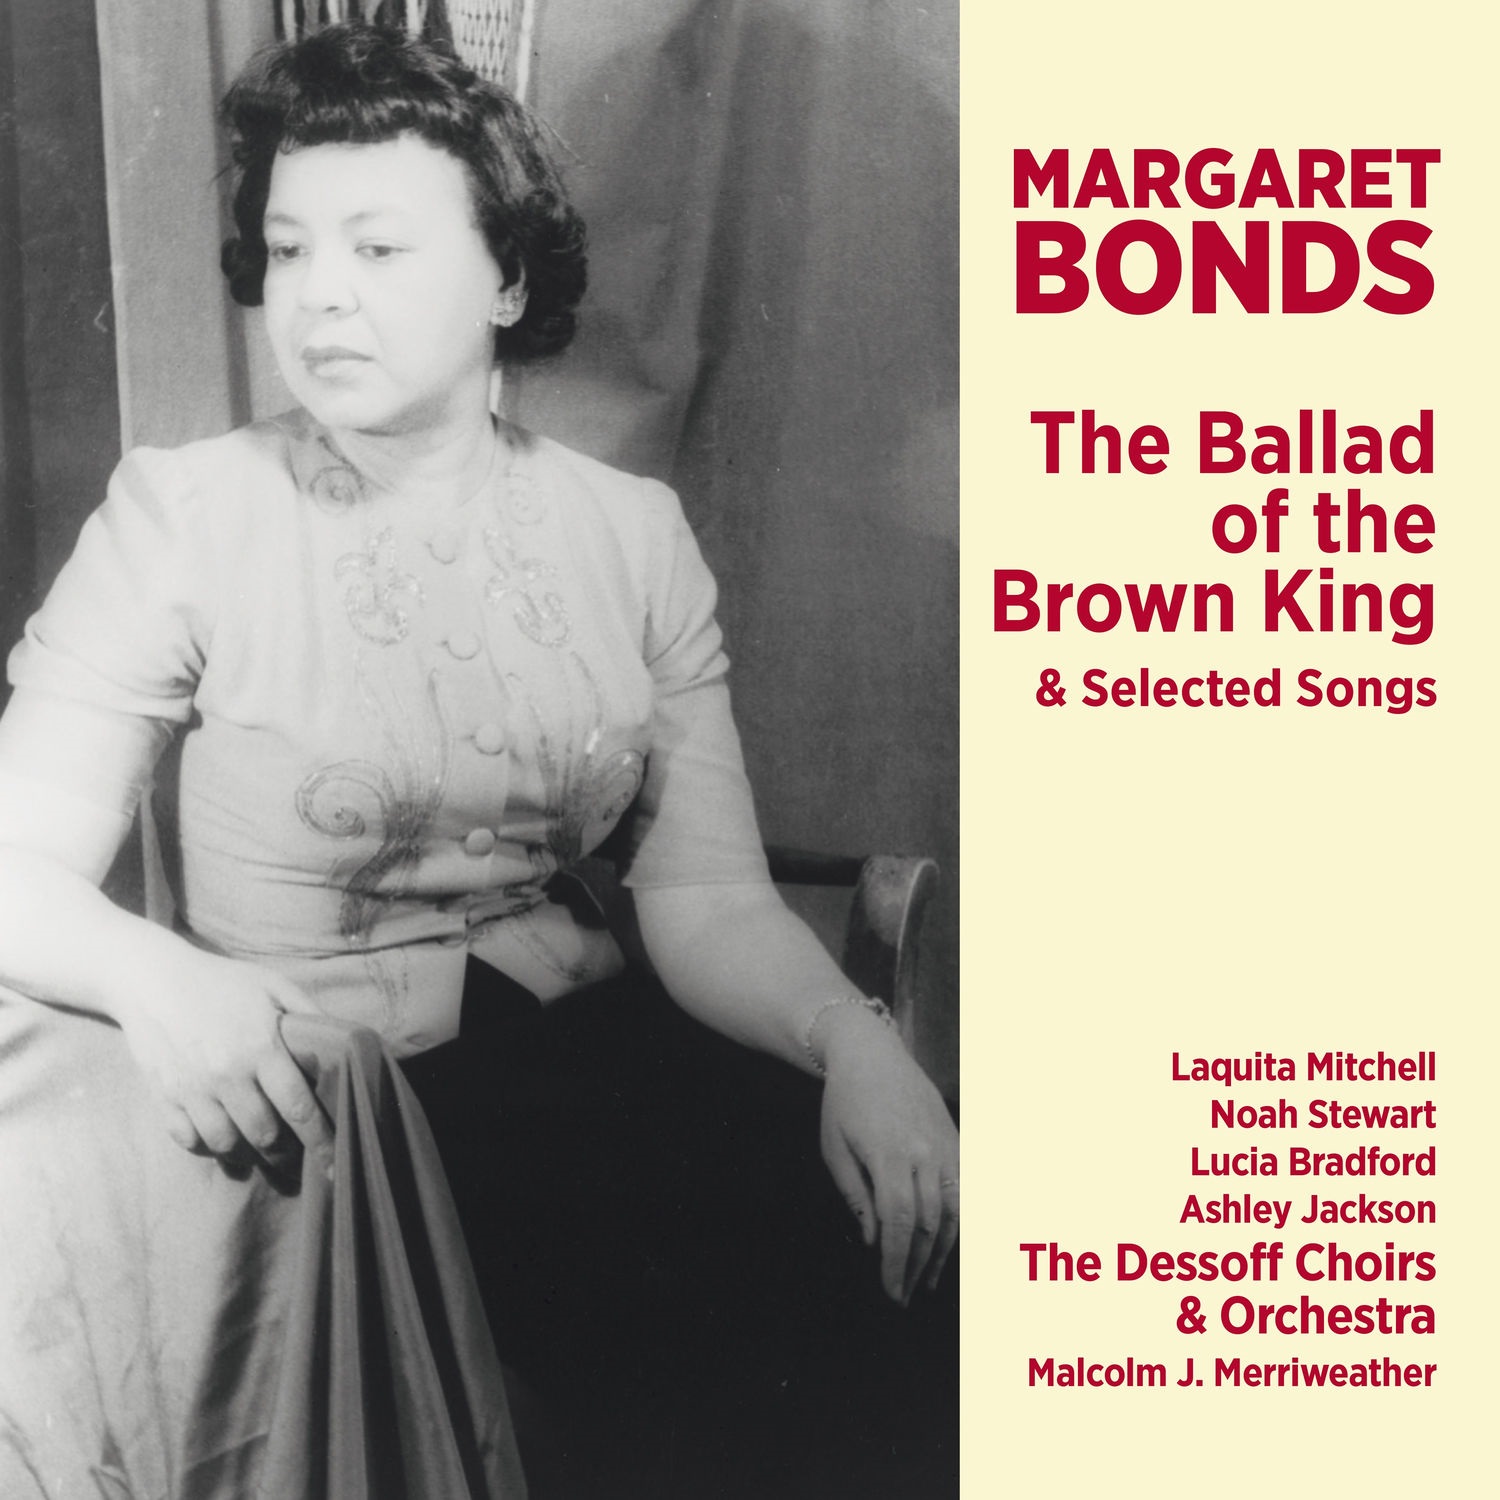 The Dessoff Choirs, Malcolm J. Merriweather – Margaret Bonds: The Ballad of the Brown King & Selected Songs (2019) [FLAC 24bit/96kHz]